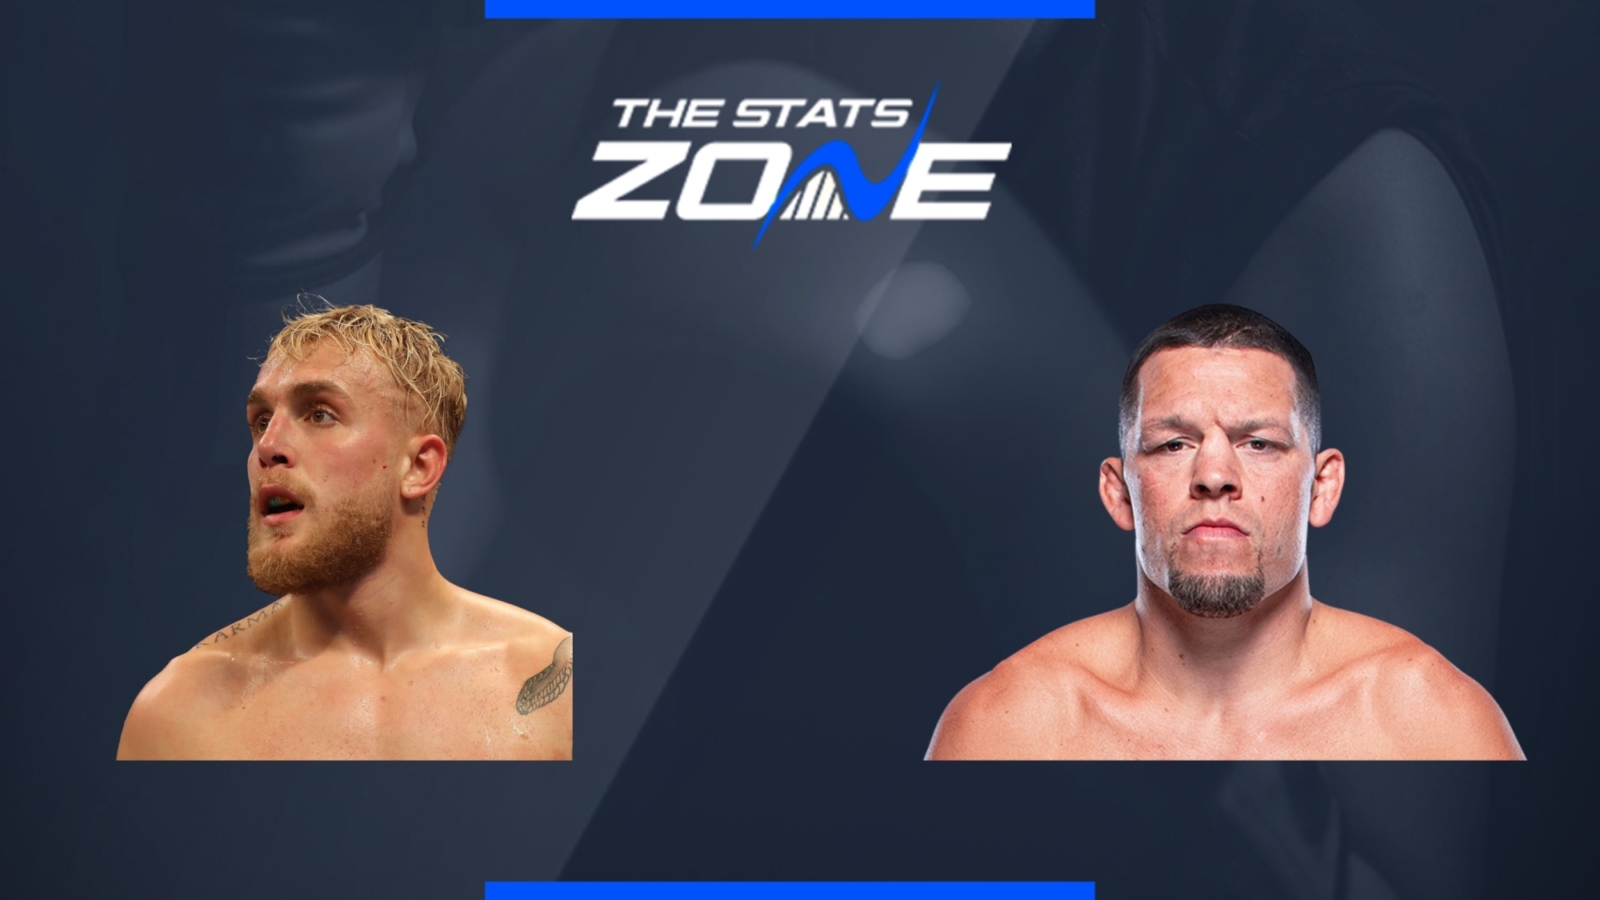 Jake Paul vs Nate Diaz start time, undercard, TV channel, streaming info and fight prediction